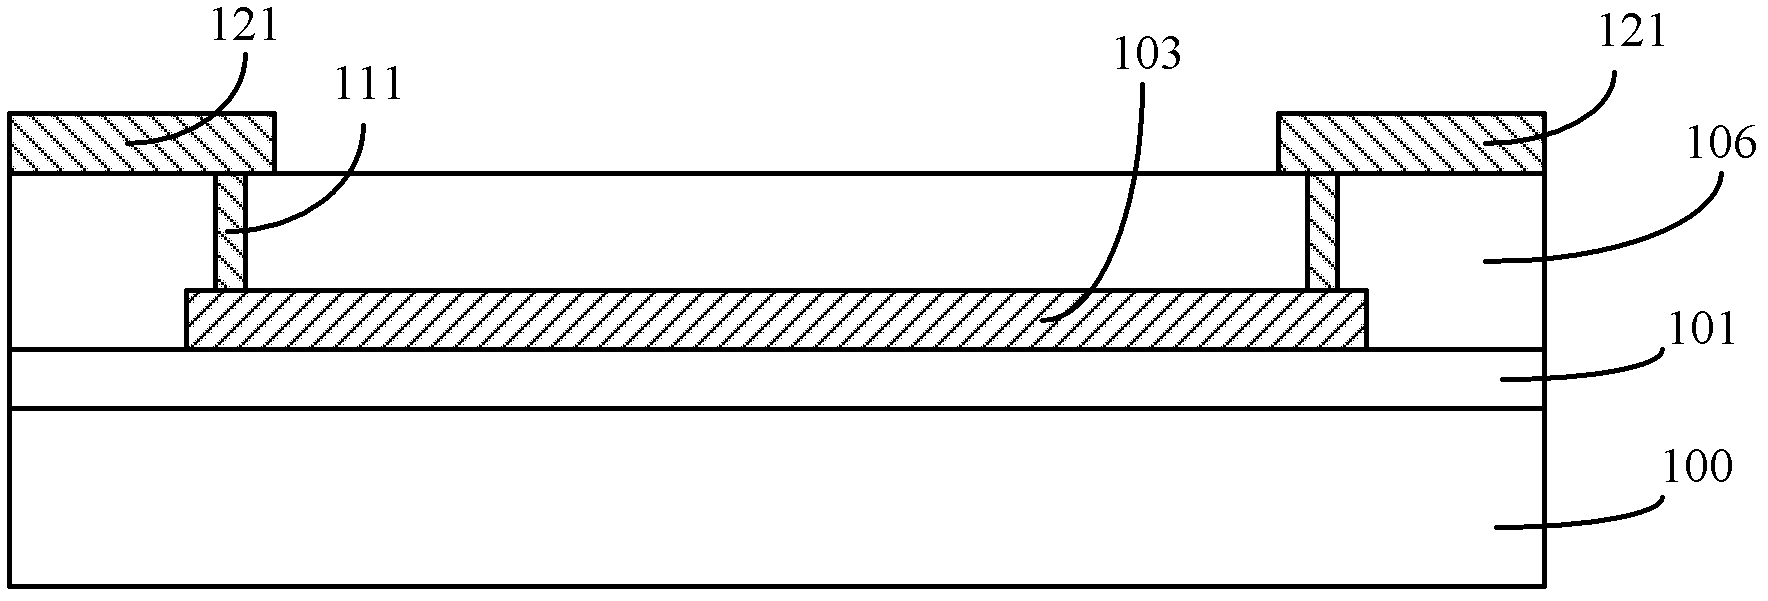 Detecting structure and detecting method for temperature coefficient of resistance (TCR)